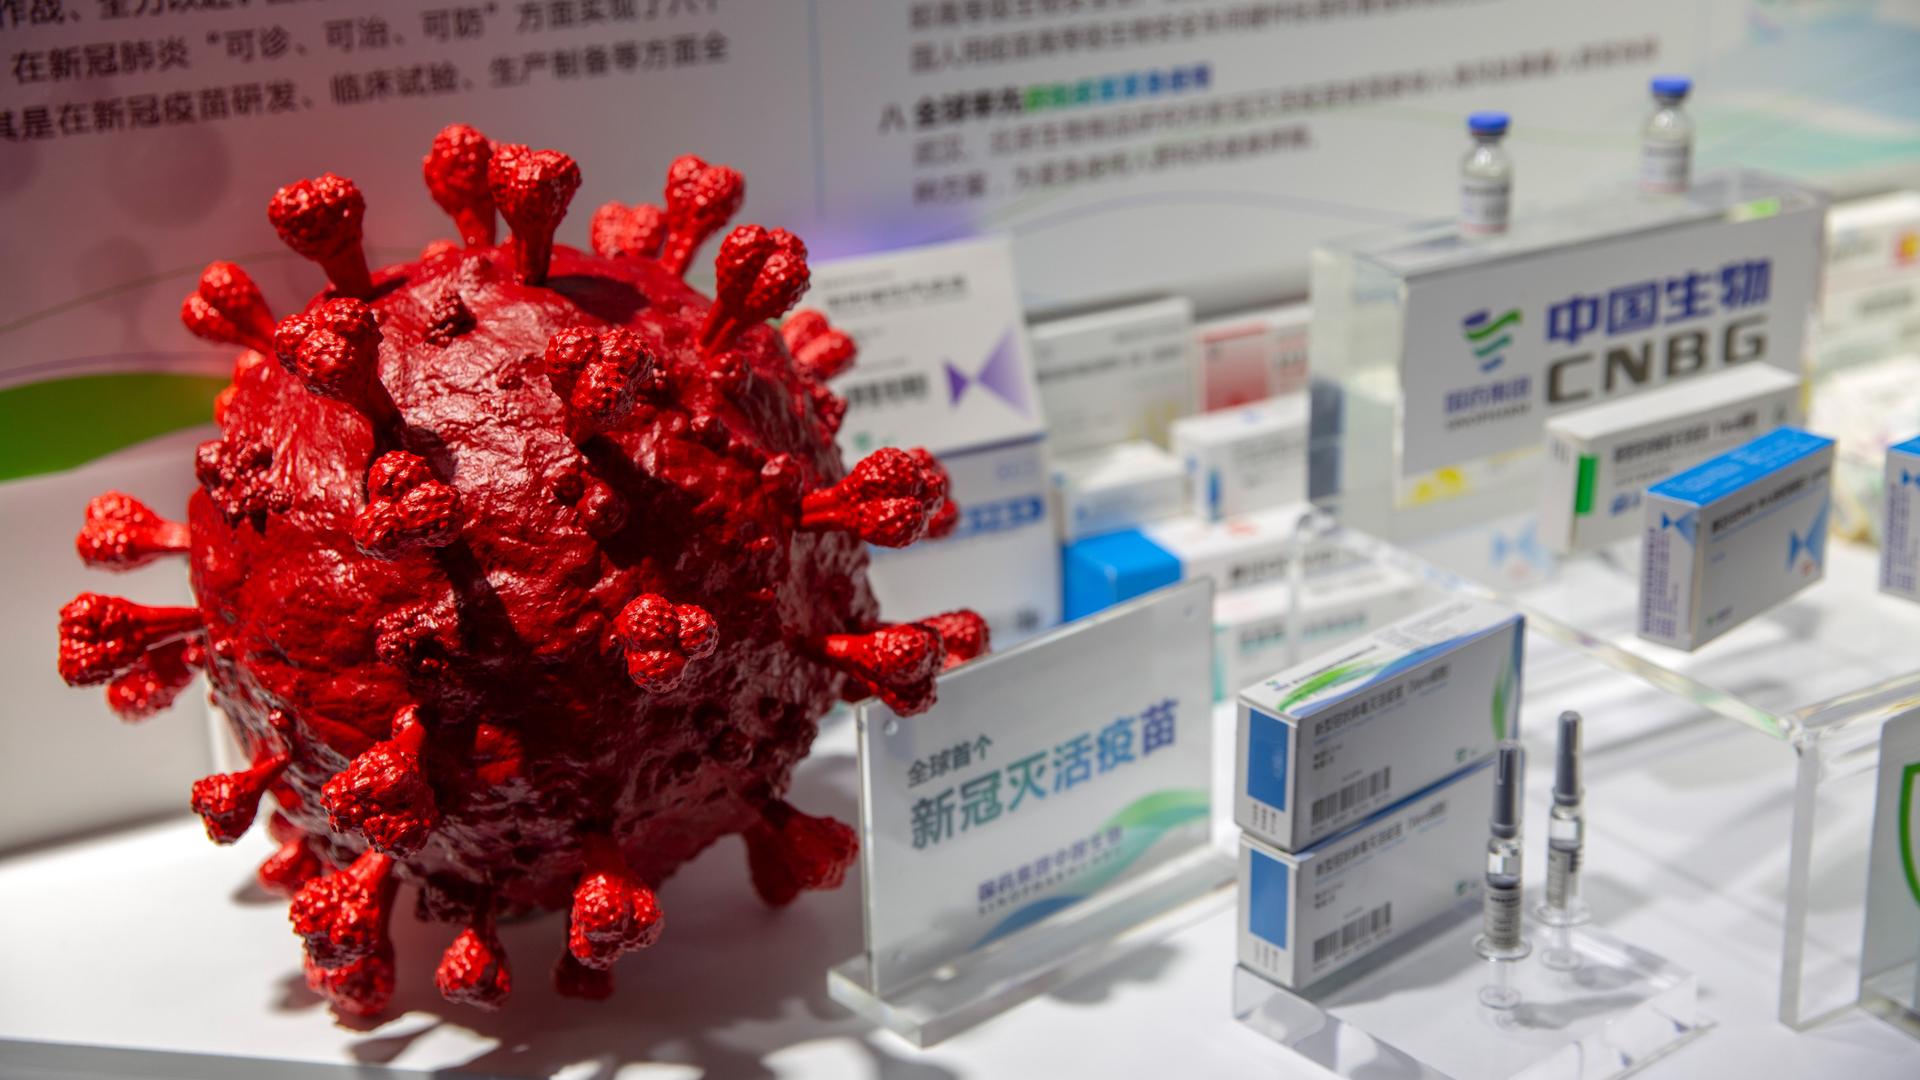 A model of the coronavirus in red is displayed next to boxes of COVID-19 vaccines